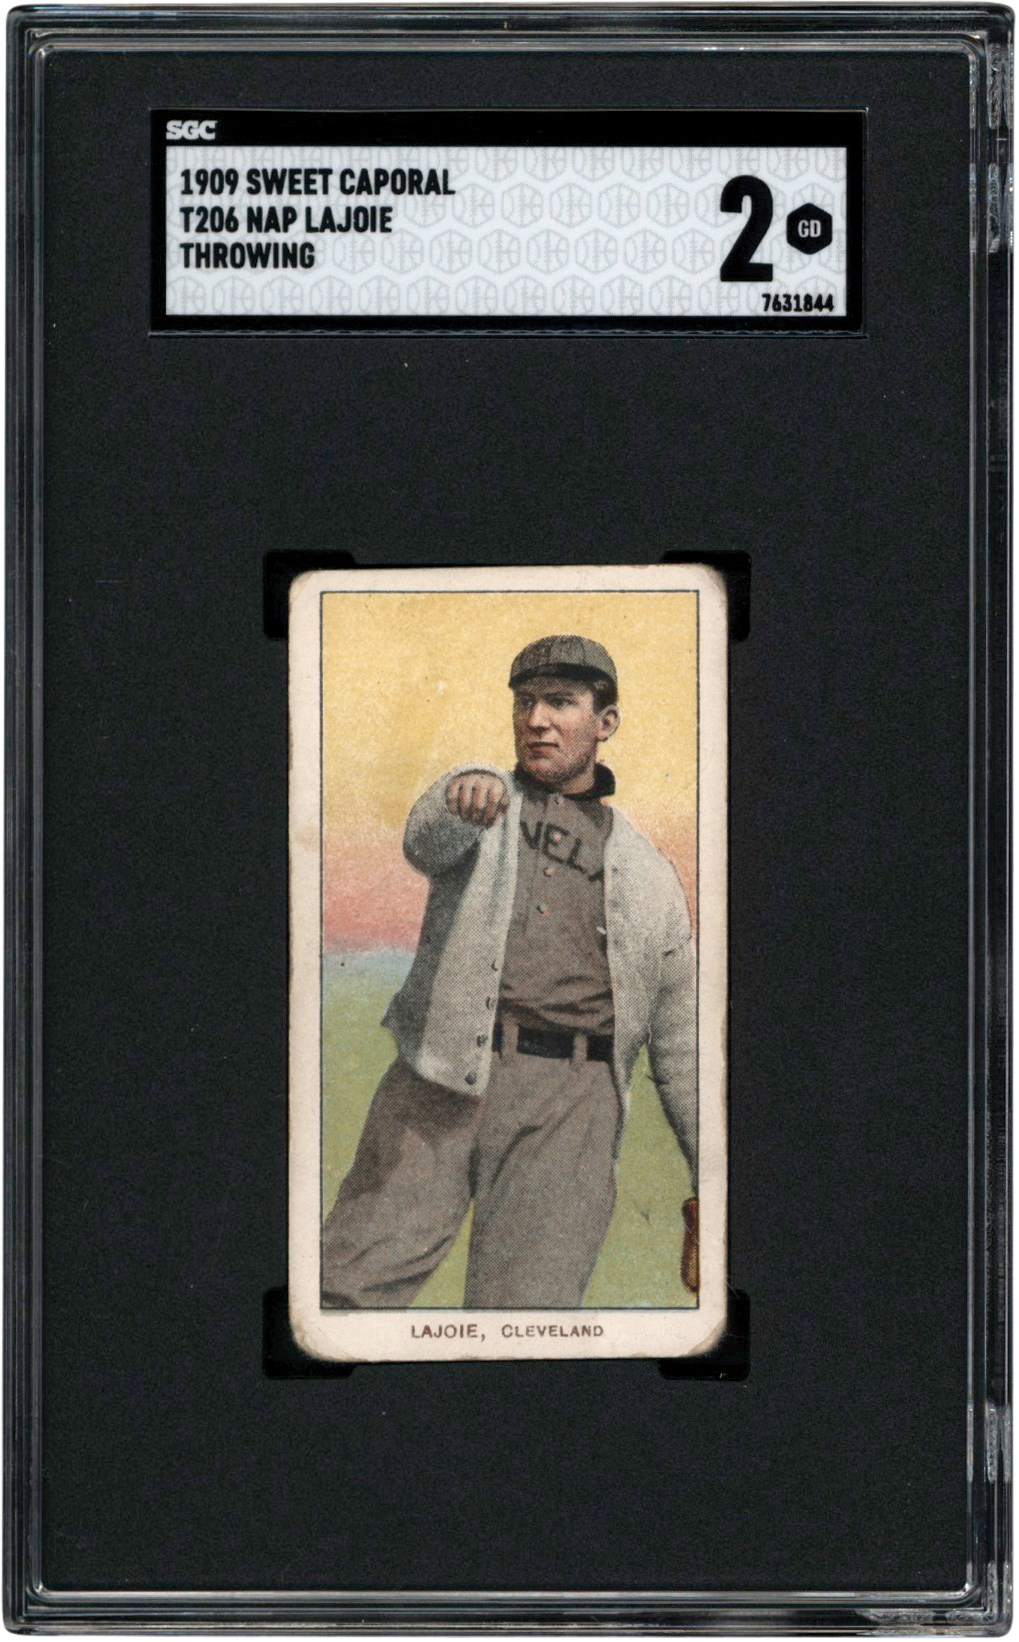 - 909-1911 T206 Nap Lajoie-Throwing Caporal 150 Back Card SGC GD 2